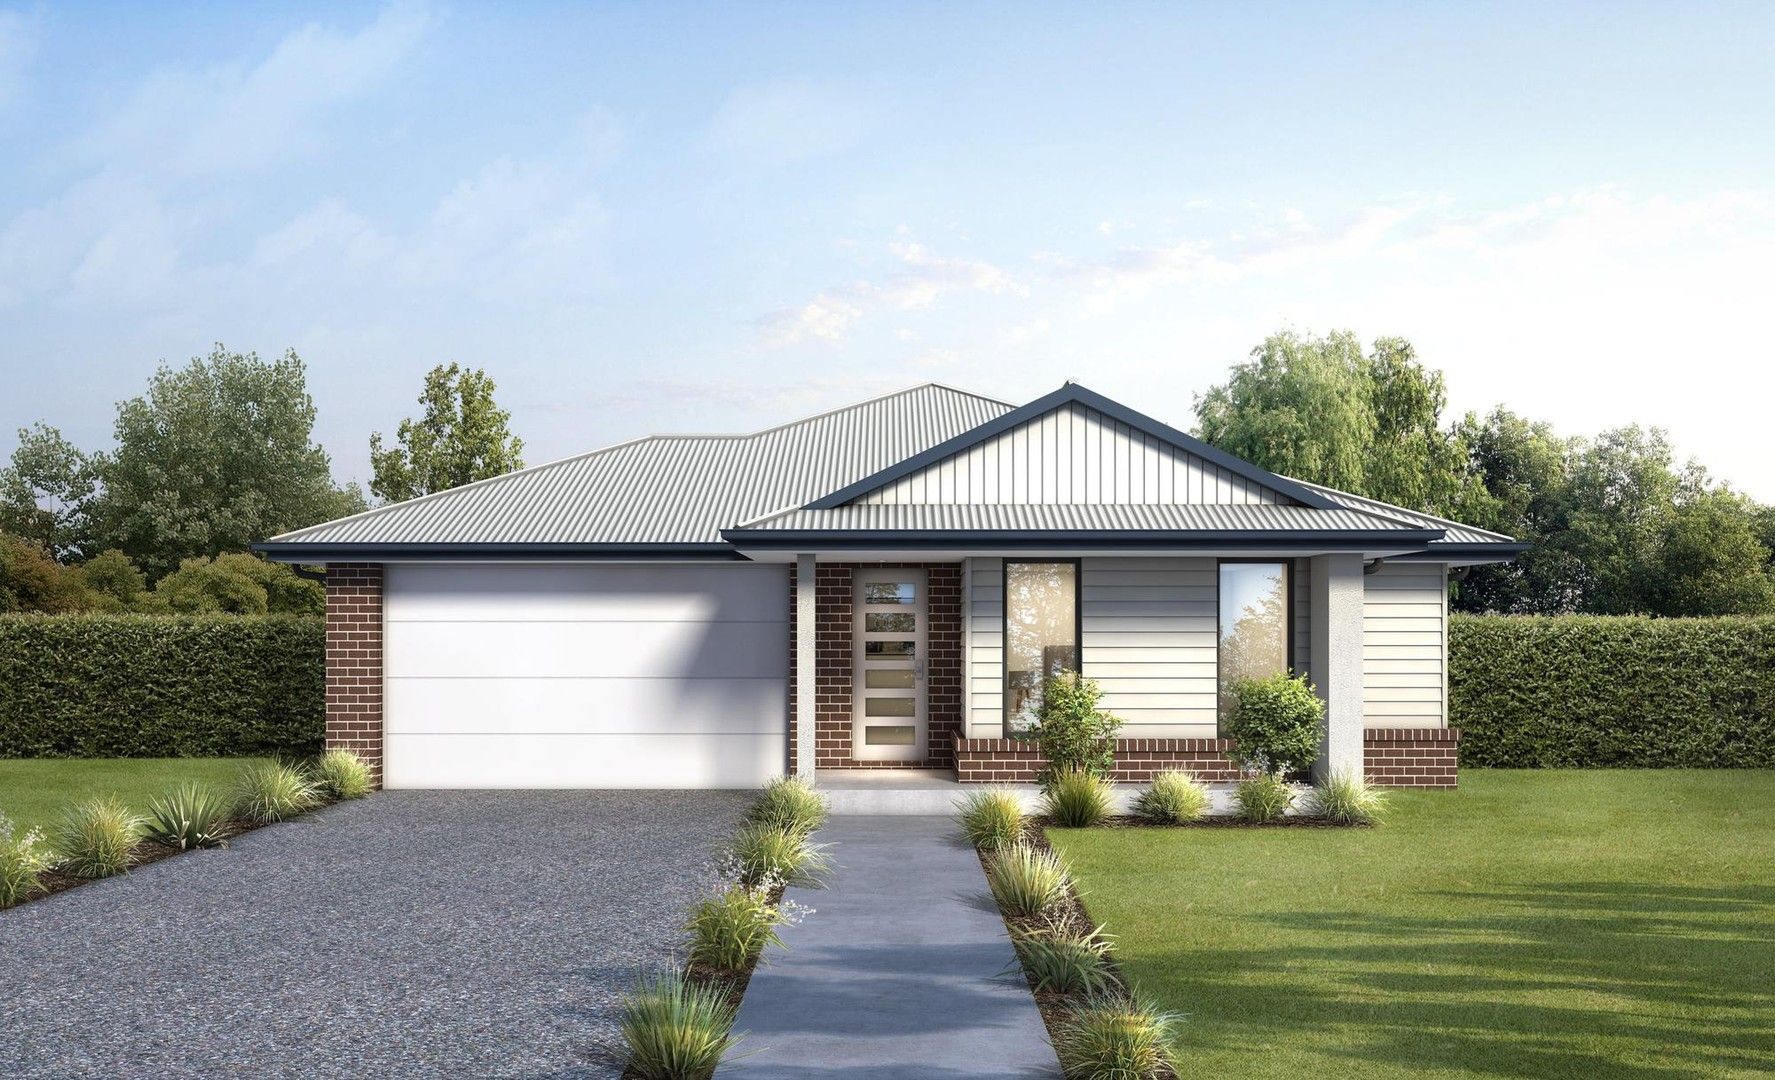 4 bedrooms New House & Land in 36 Platypus Parade LAKE CATHIE NSW, 2445